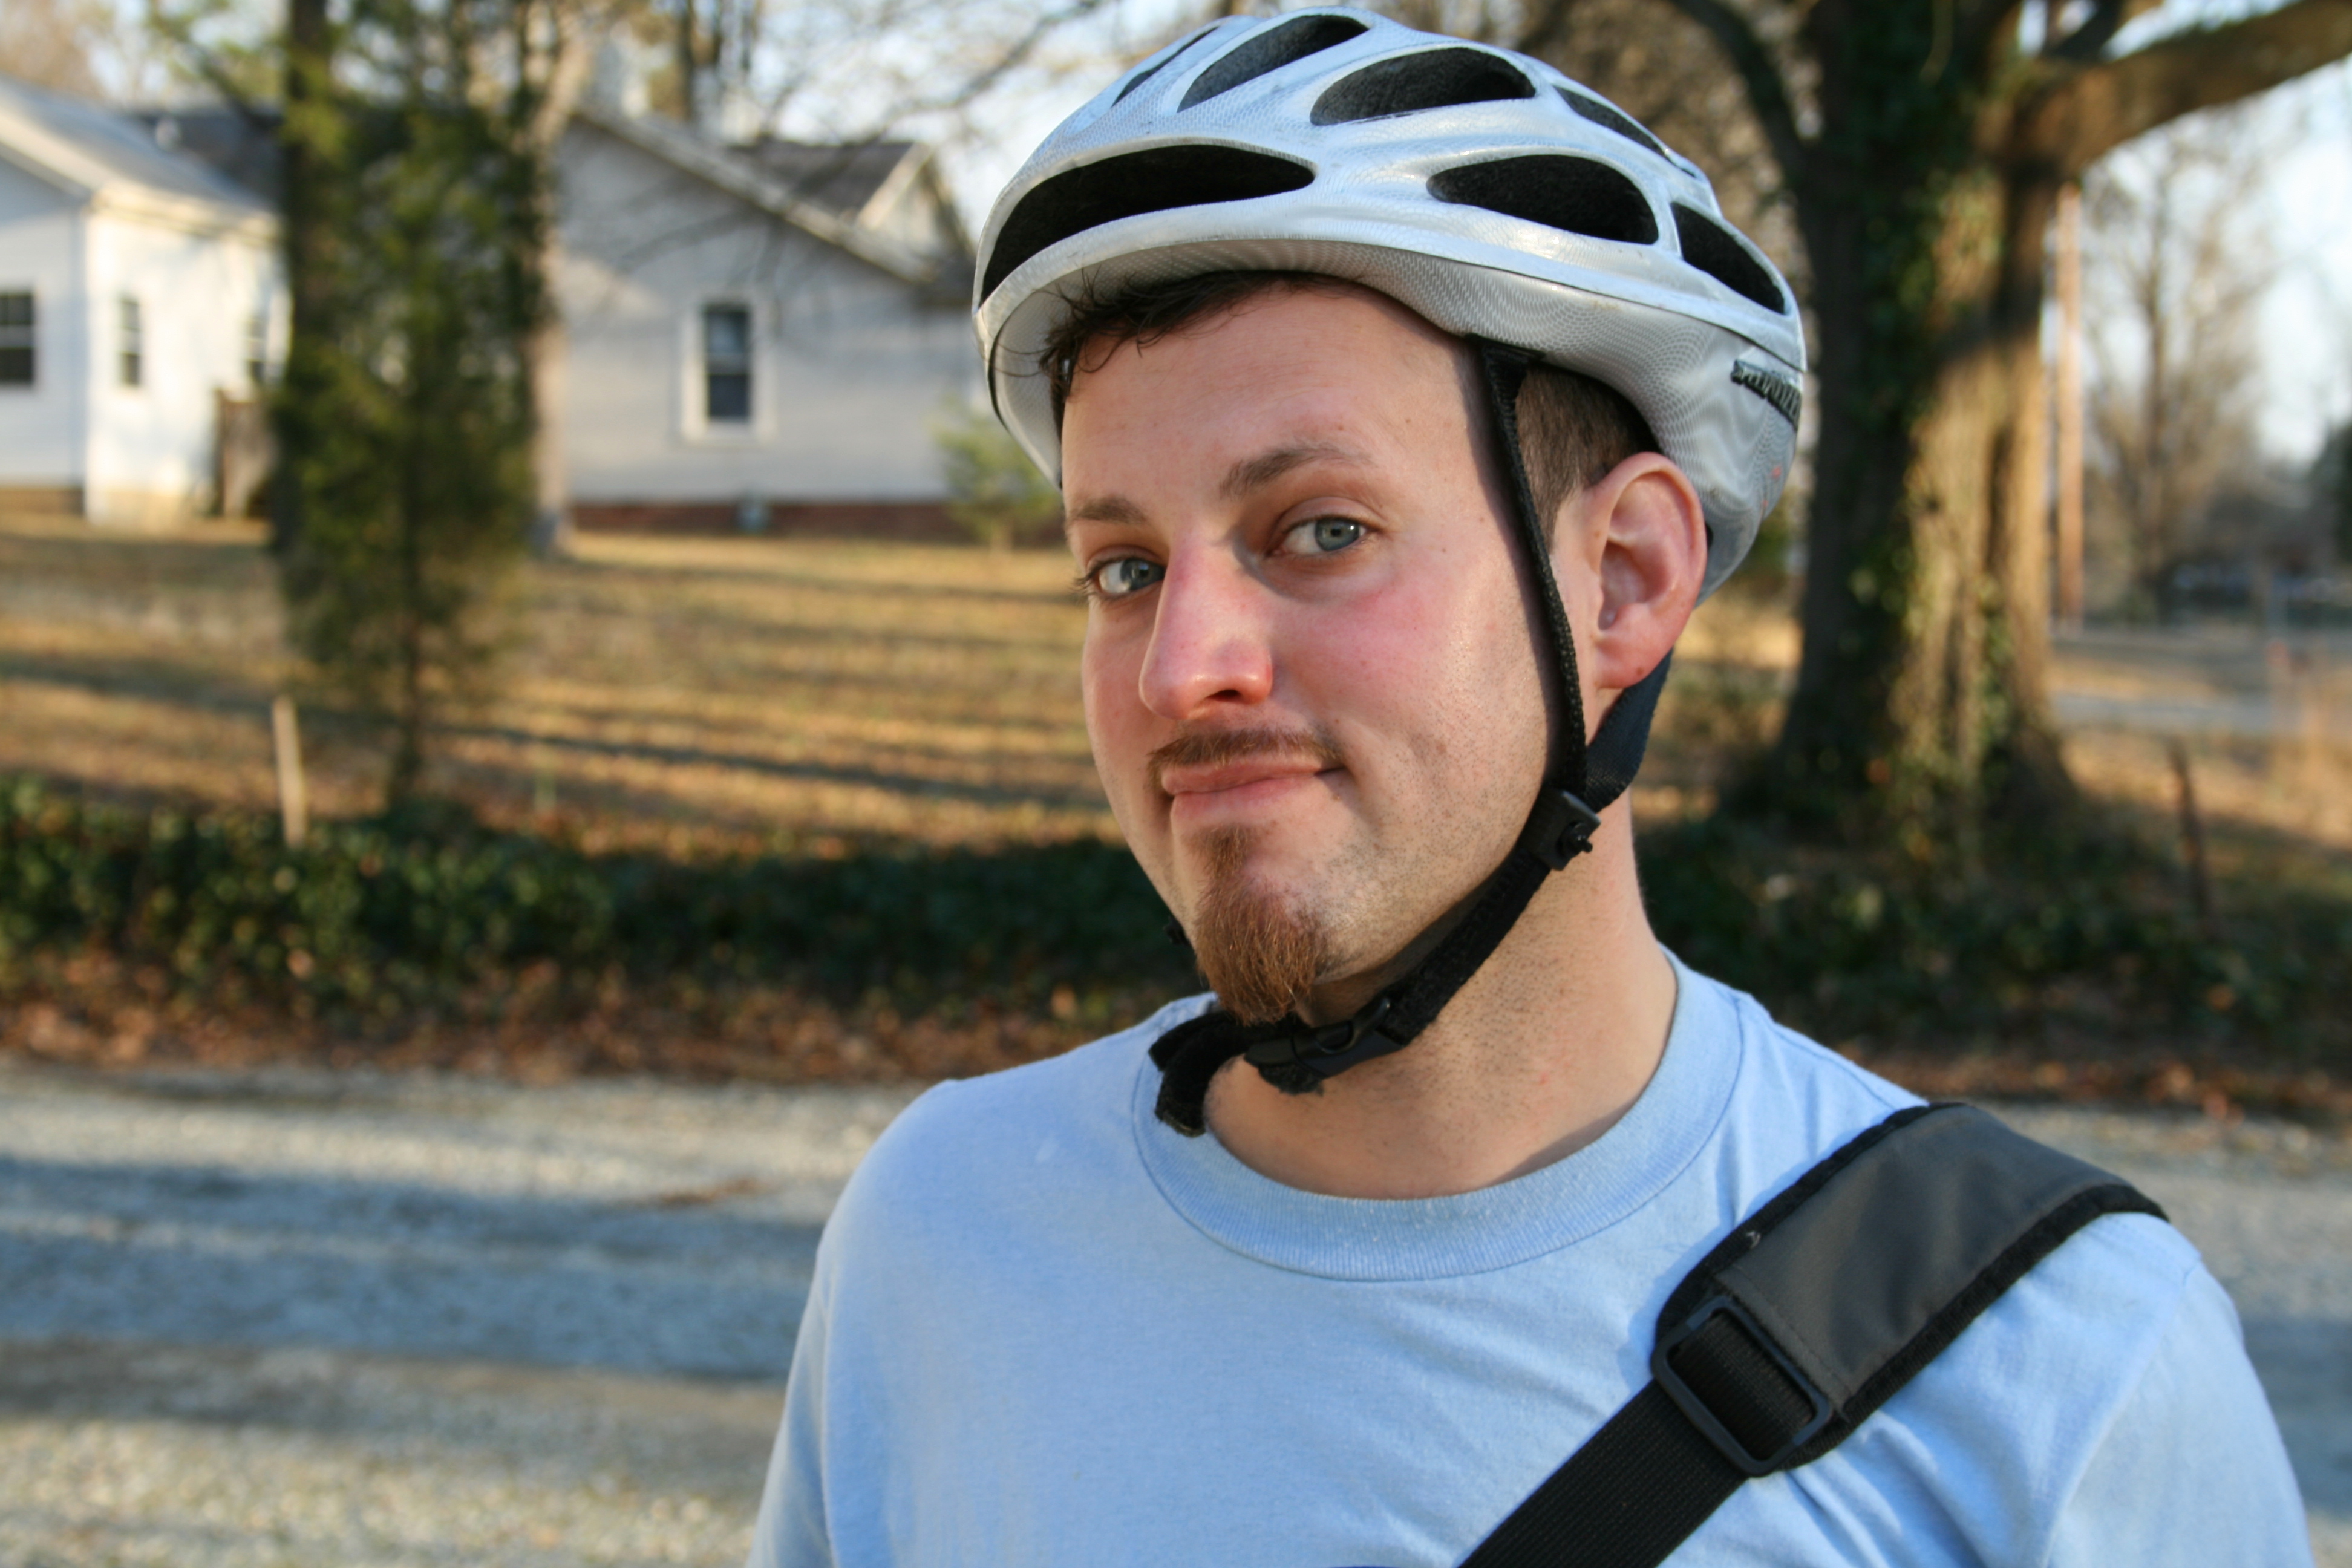 File:2009-03-07 Man with bicycle helmet.jpg - Wikimedia Commons